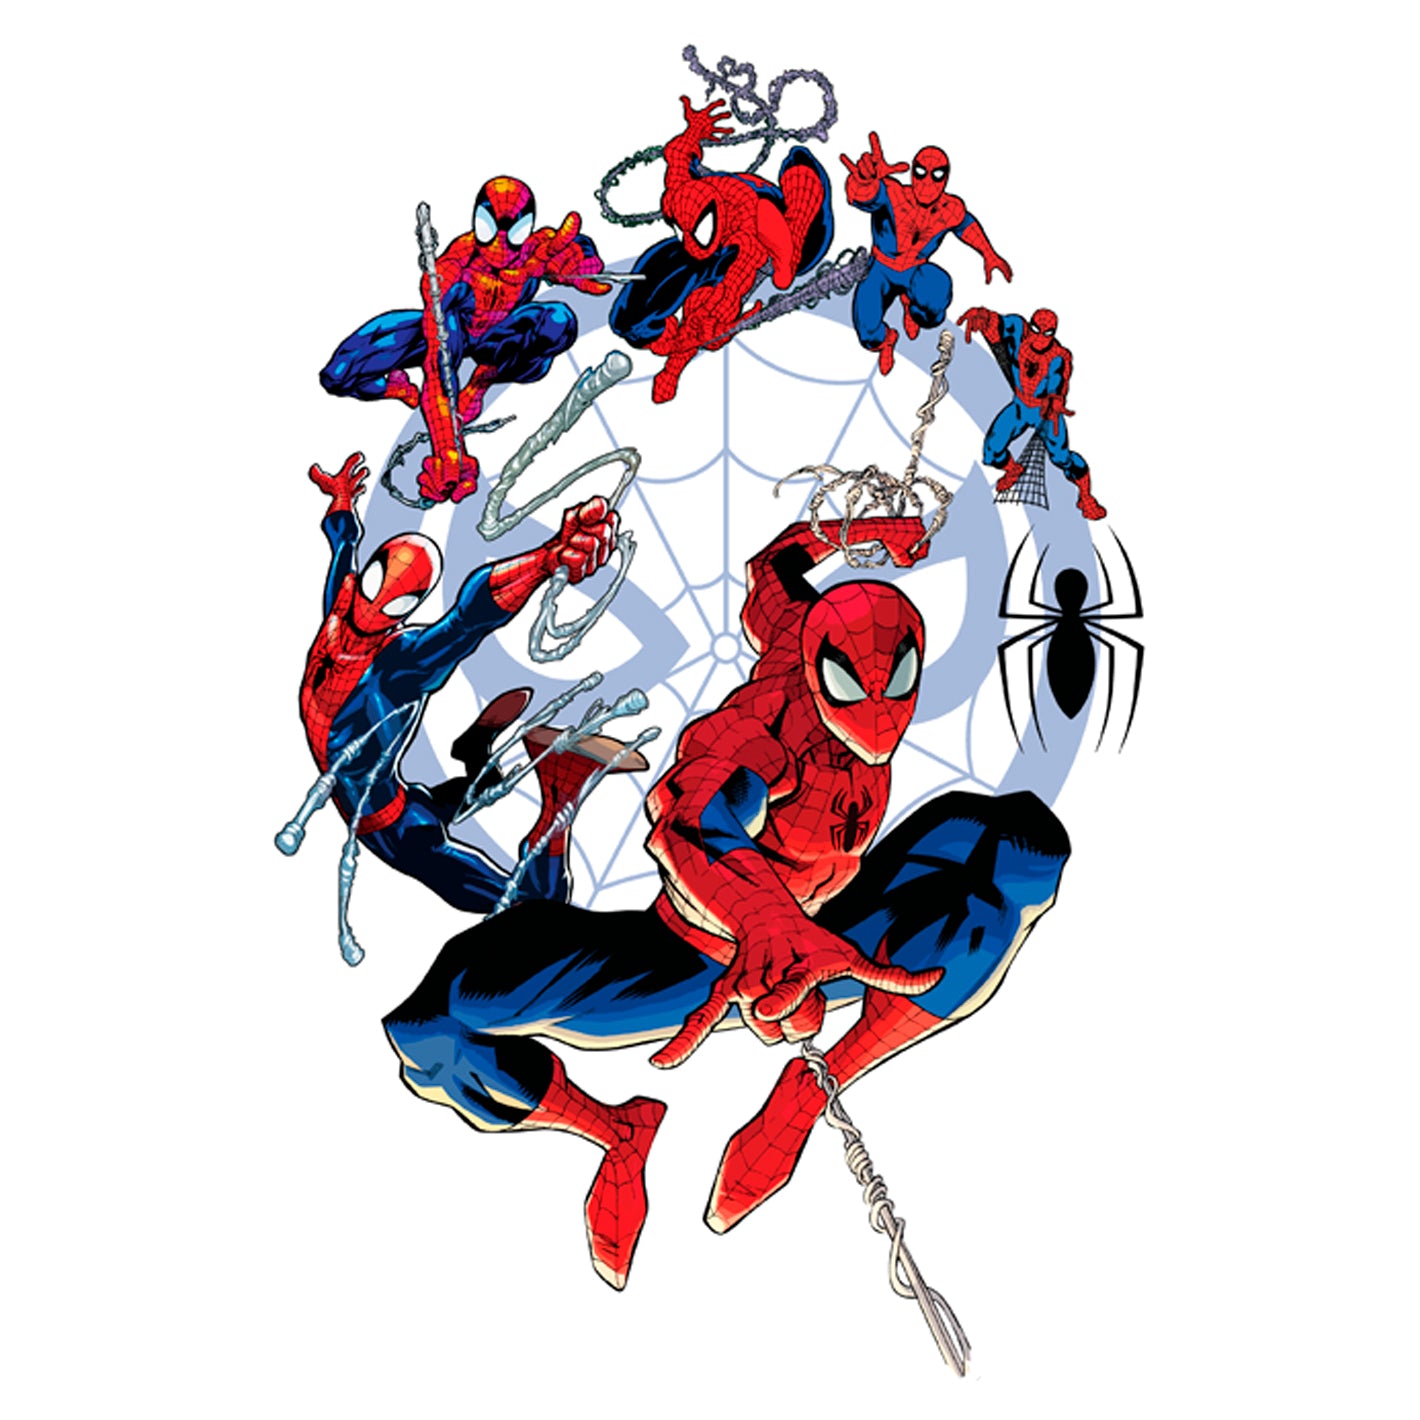 Spidey and His Amazing Friends - Marvel Poster (Spider-Man) (Size: 24 inch x 36 inch), Size: 24 x 36